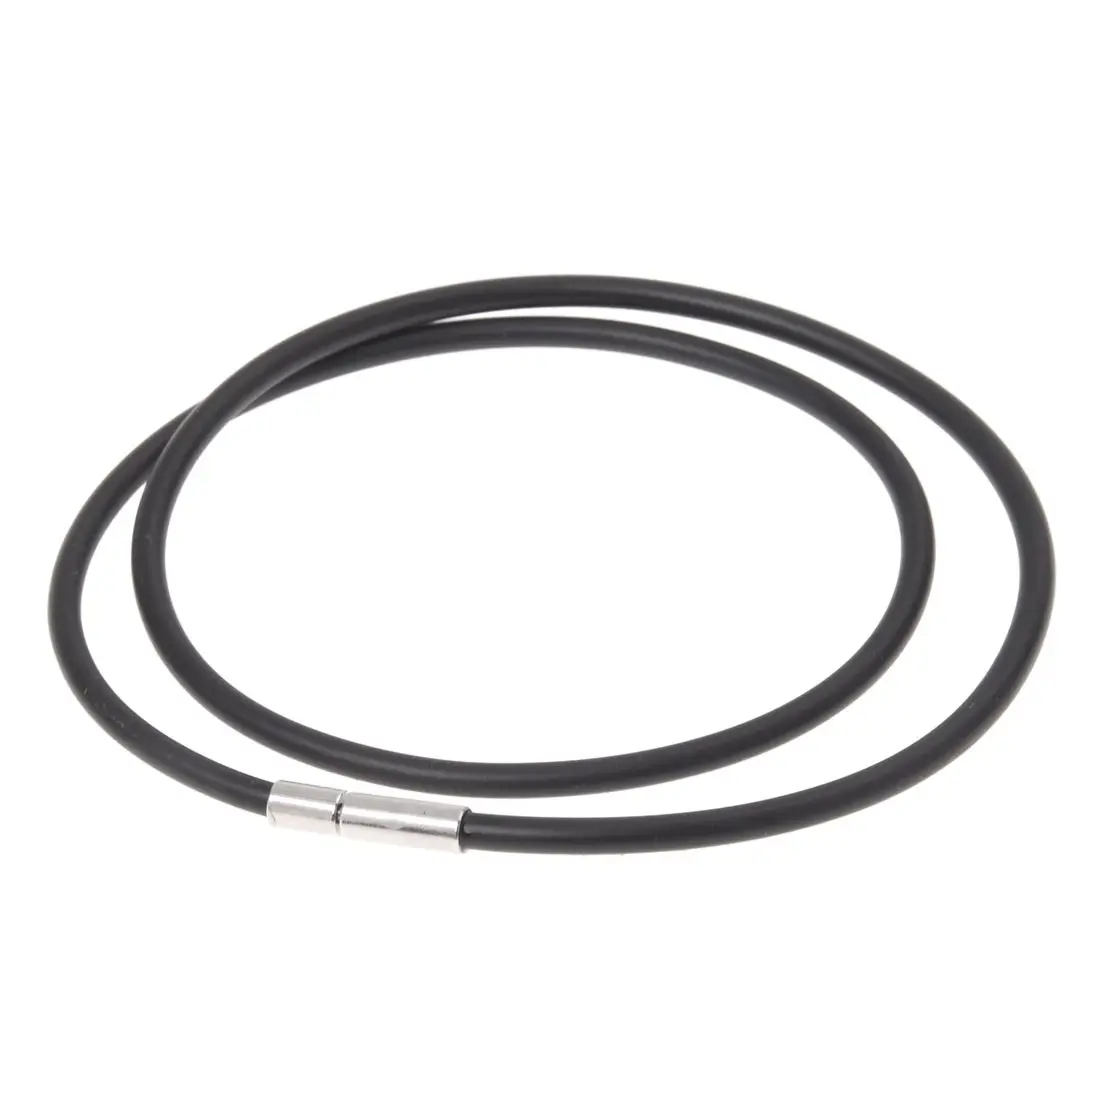 

3mm Black Rubber Cord Necklace with Stainless Steel Closure Women Men Choker Accessories Collier - 18 Inches